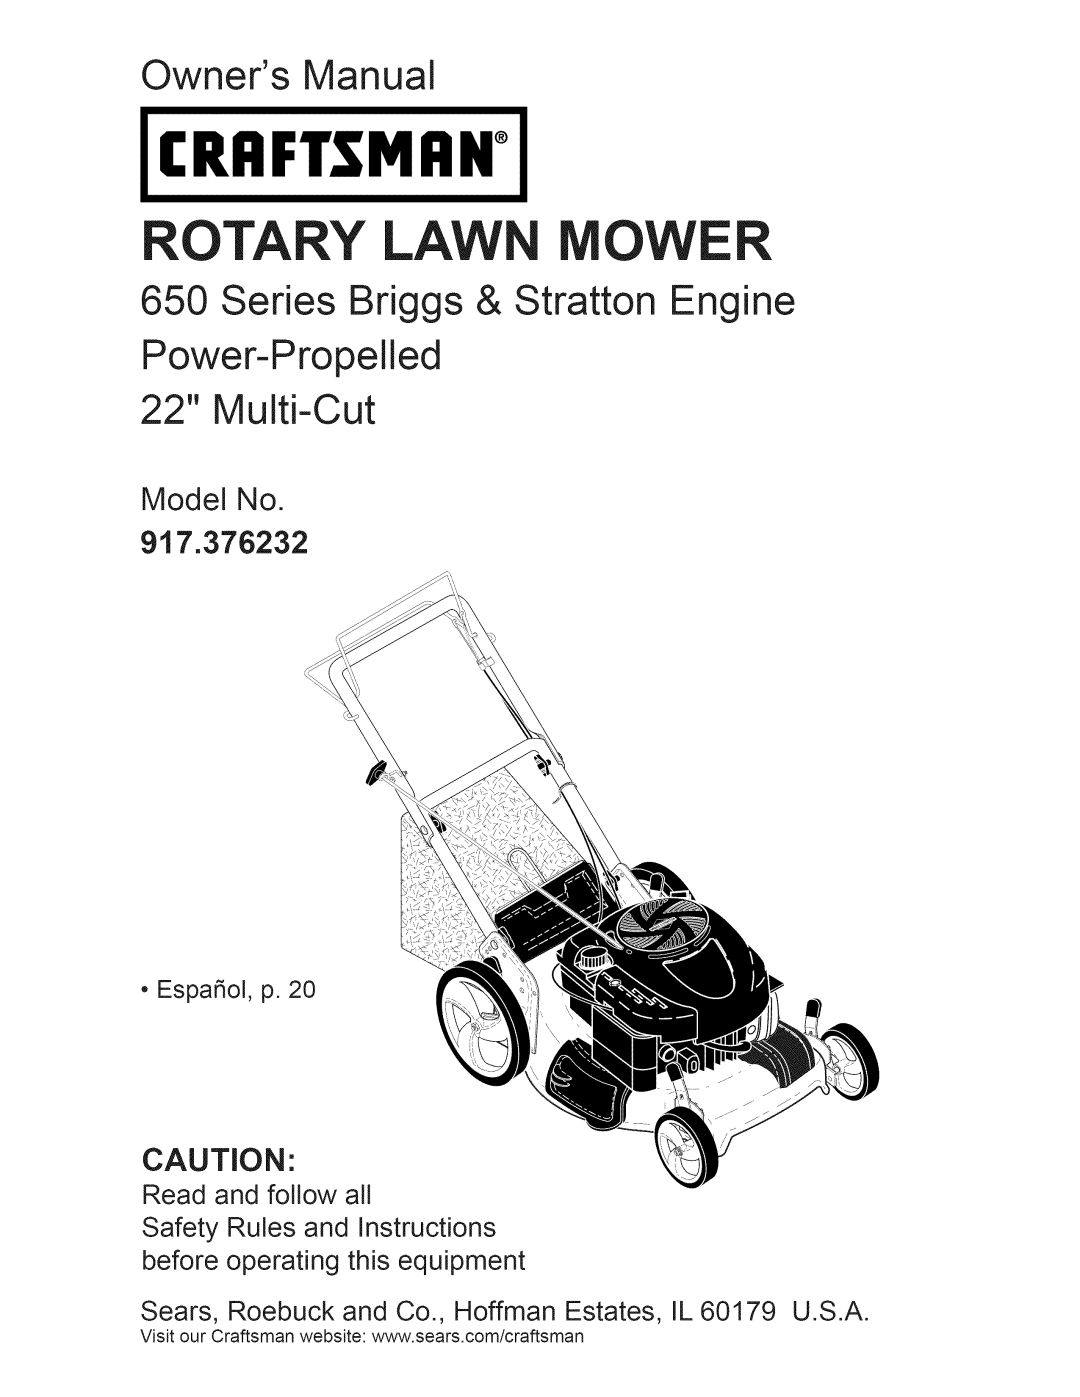 Craftsman manual Model No 917.376232, Craftsman, Rotary Lawn Mower, Owners Manual, Series Briggs & Stratton Engine 